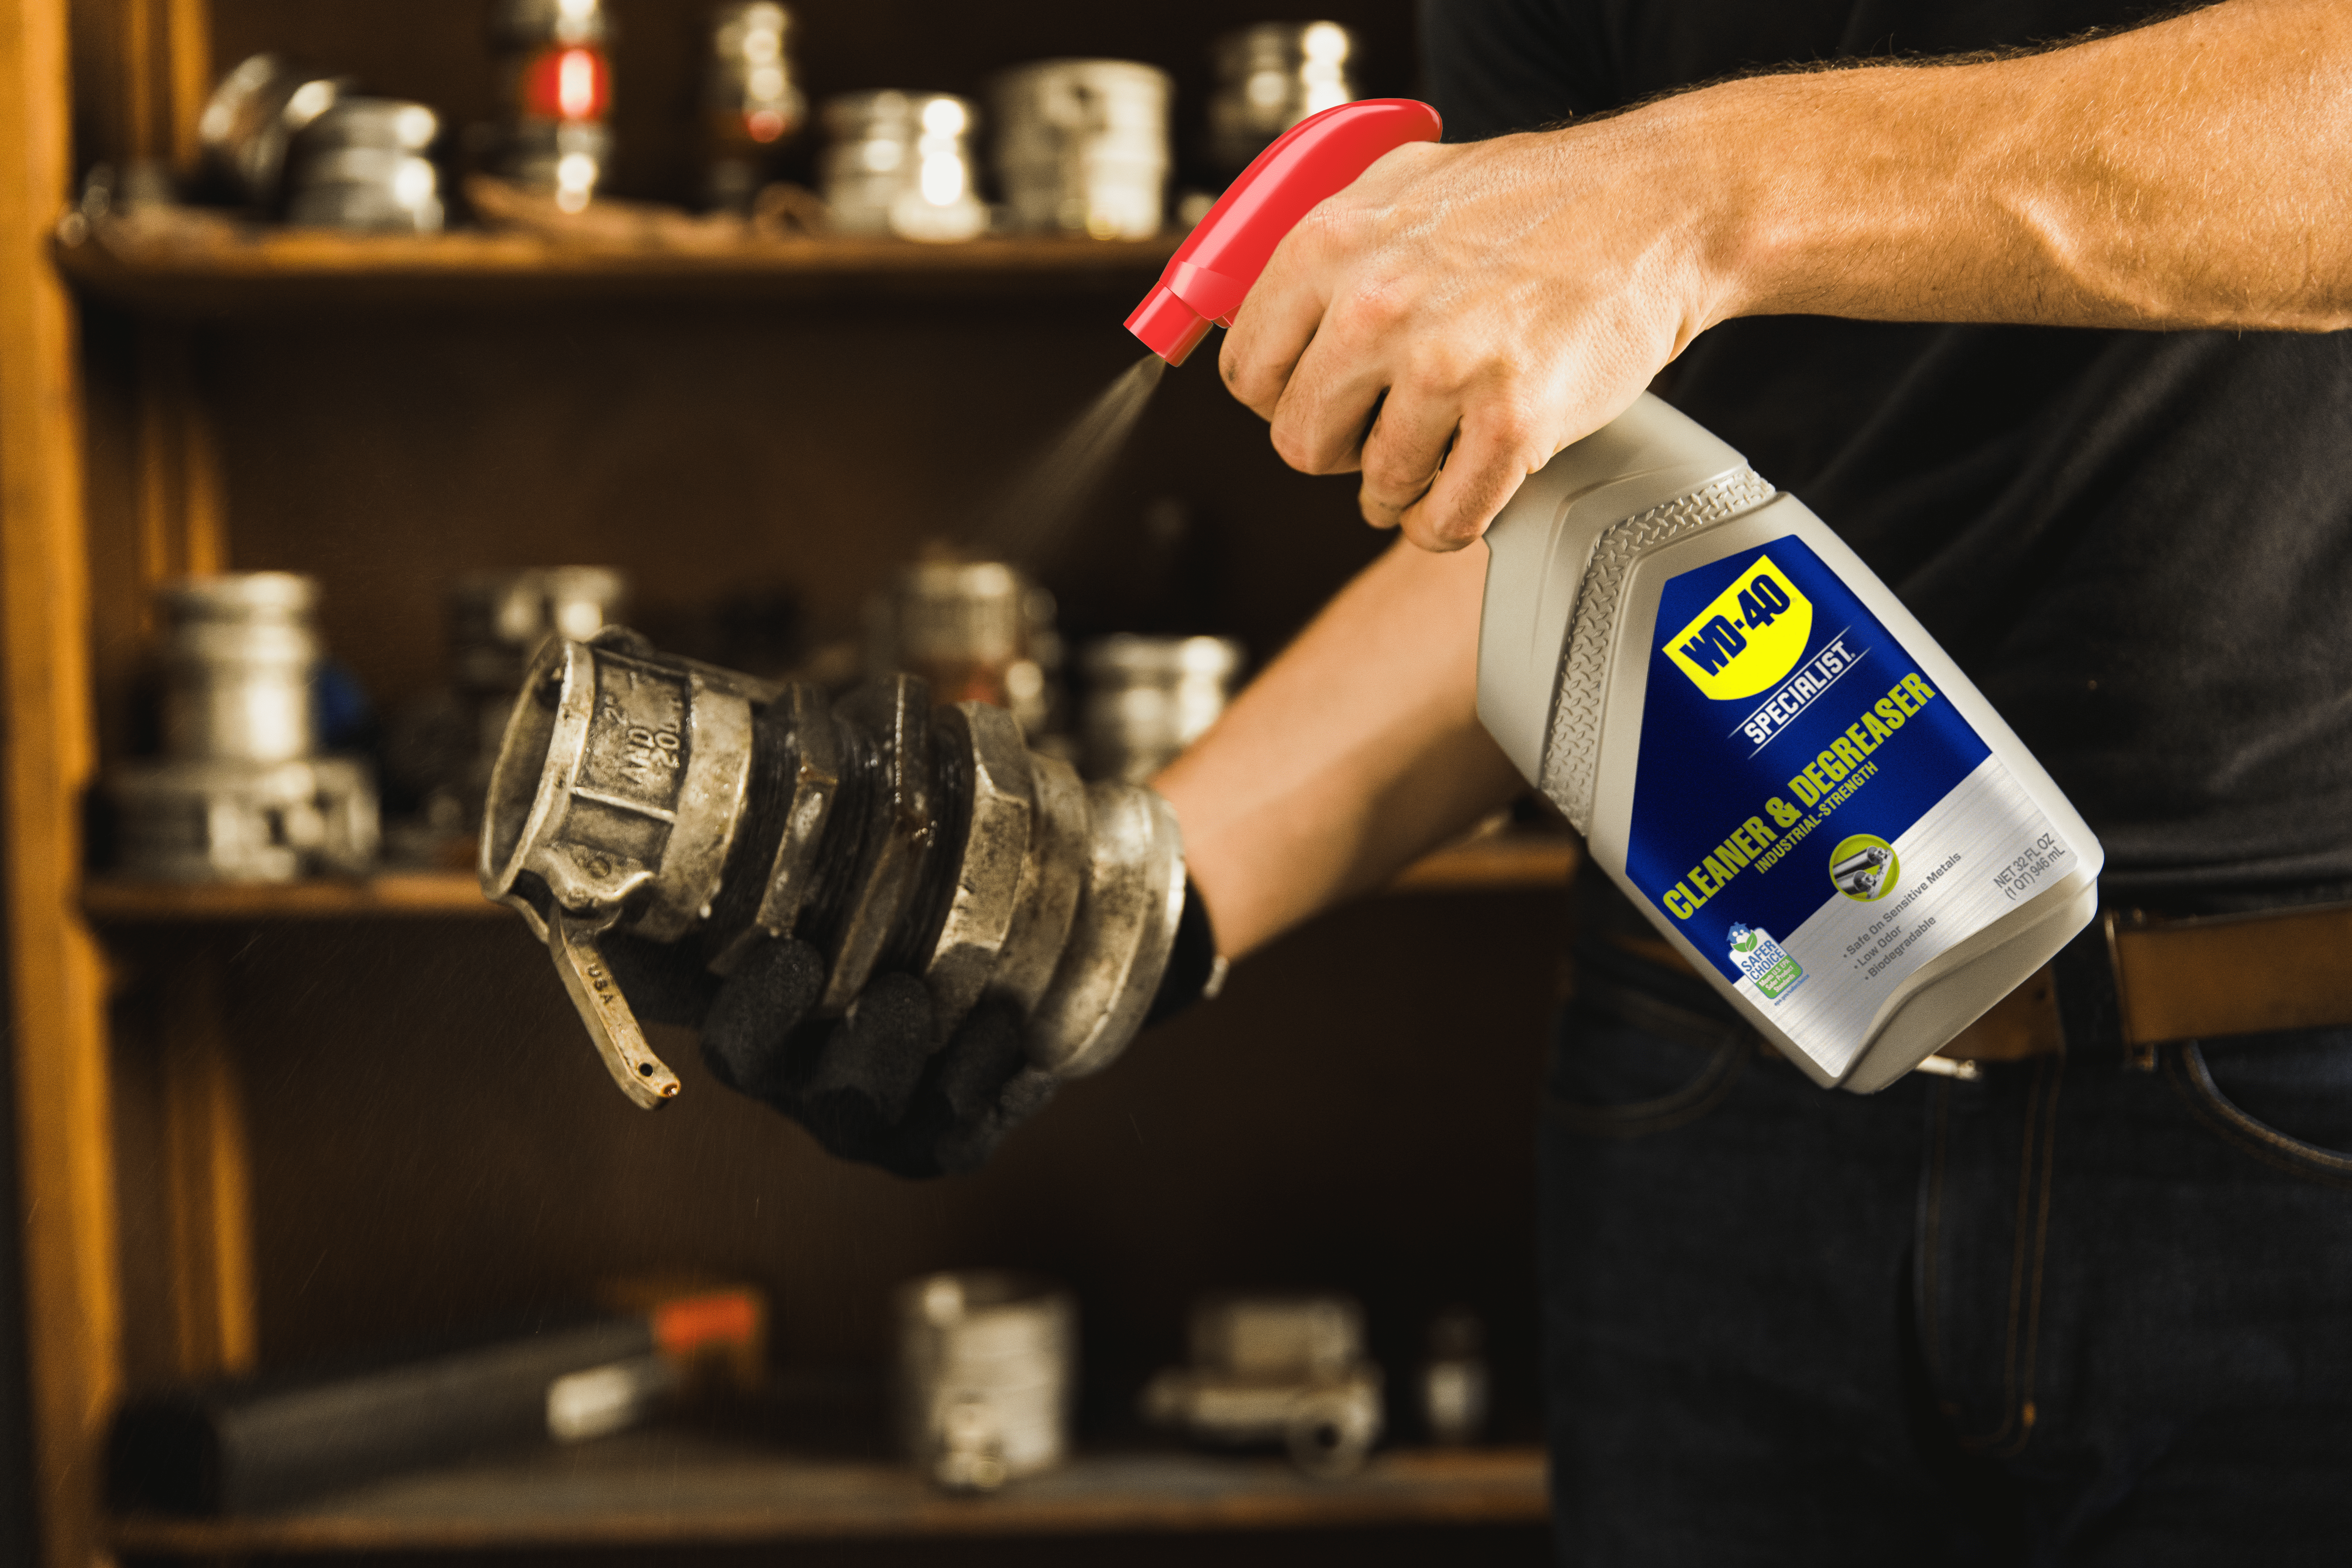 WD-40 300070 Specialist Degreaser, 18 oz